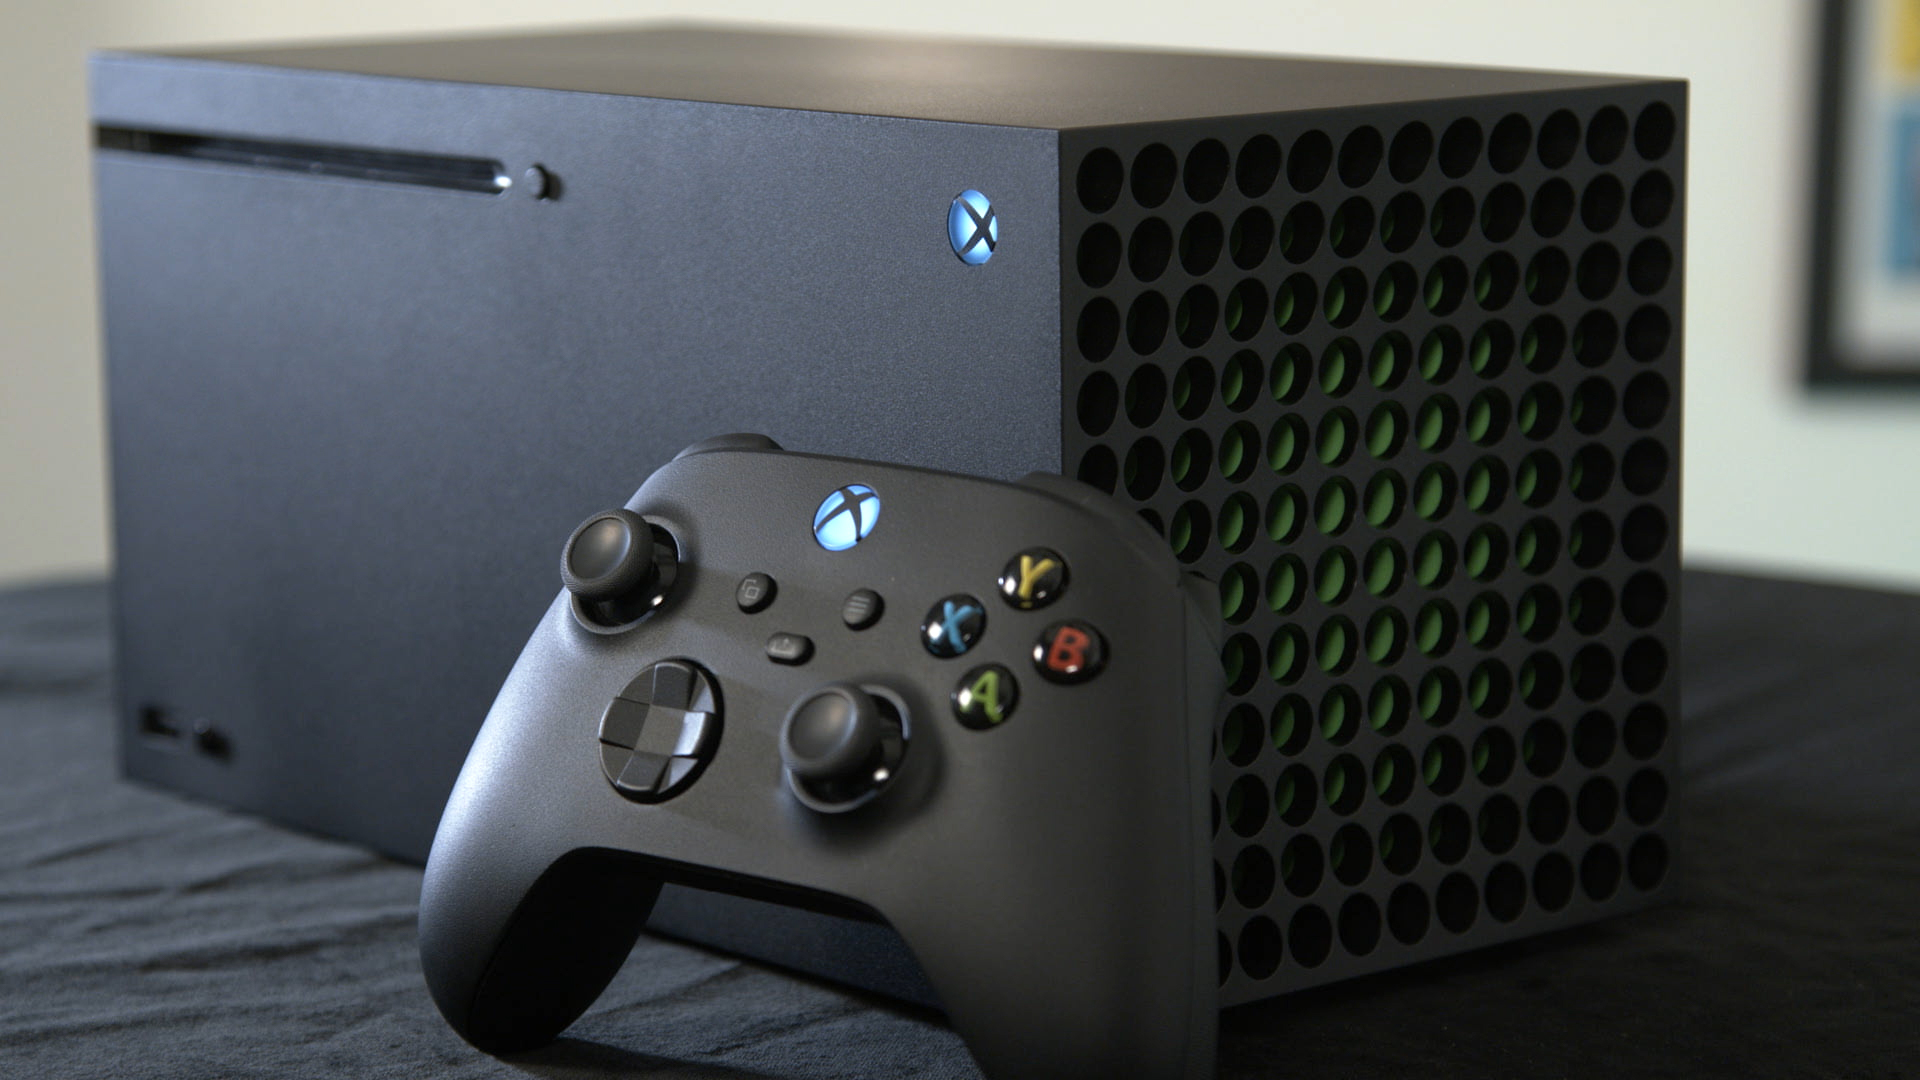 Exciting Sneak Peek Xbox Series X 2024 'Brooklin' Edition - Release Date, Price, and Cool New Features